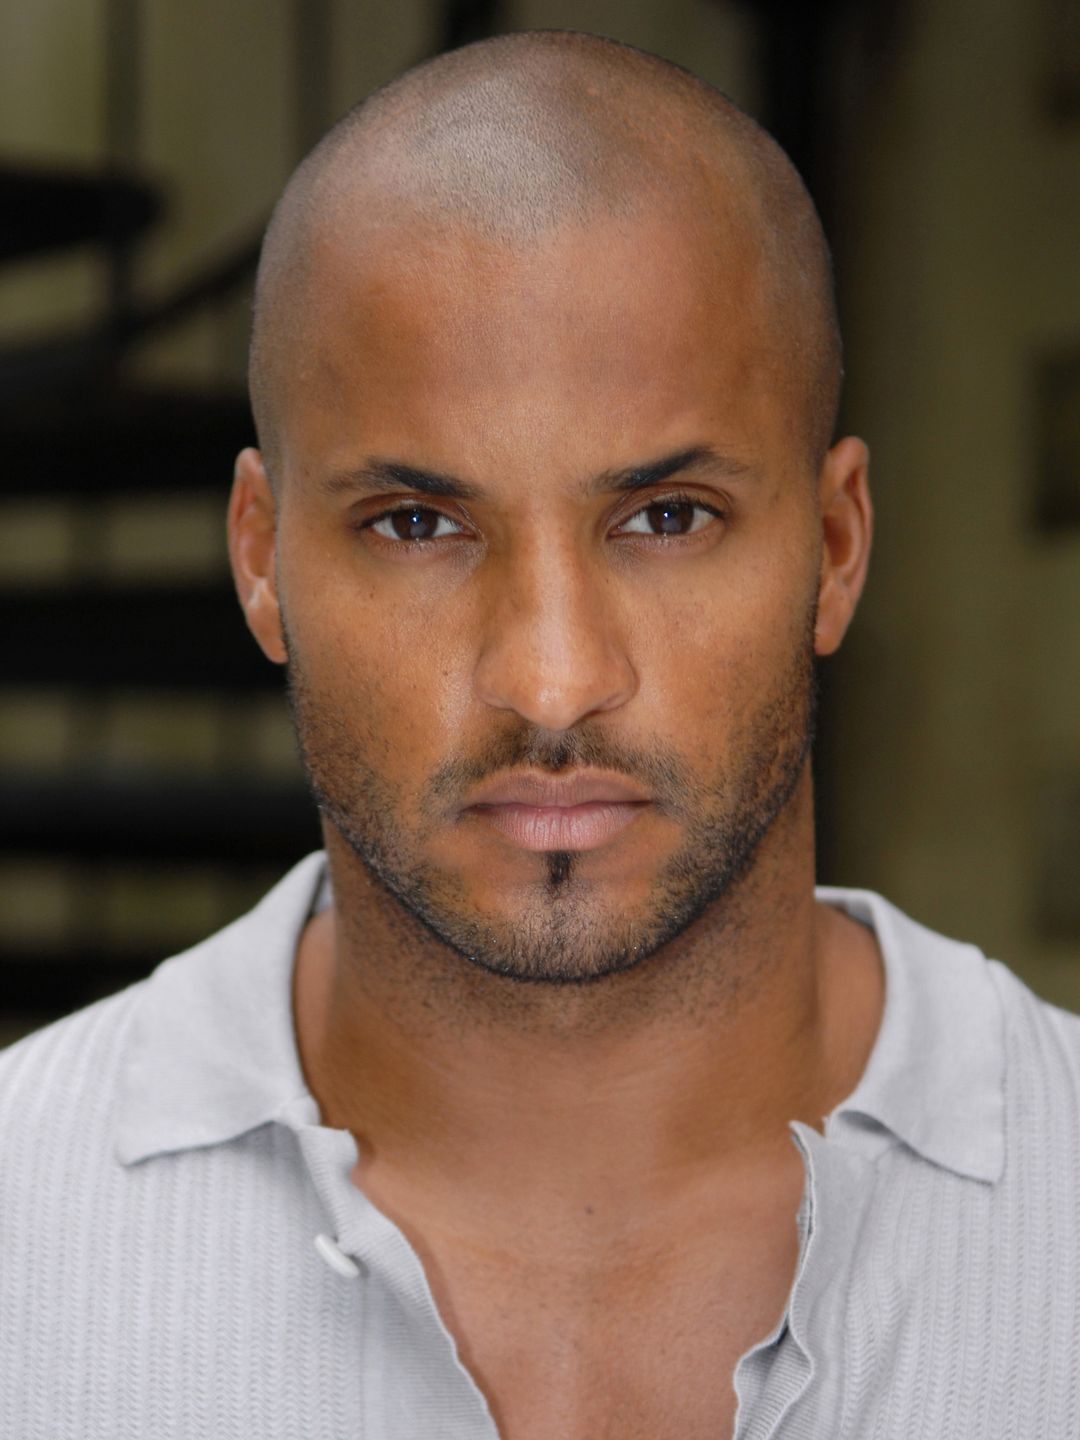 Ricky Whittle who are his parents